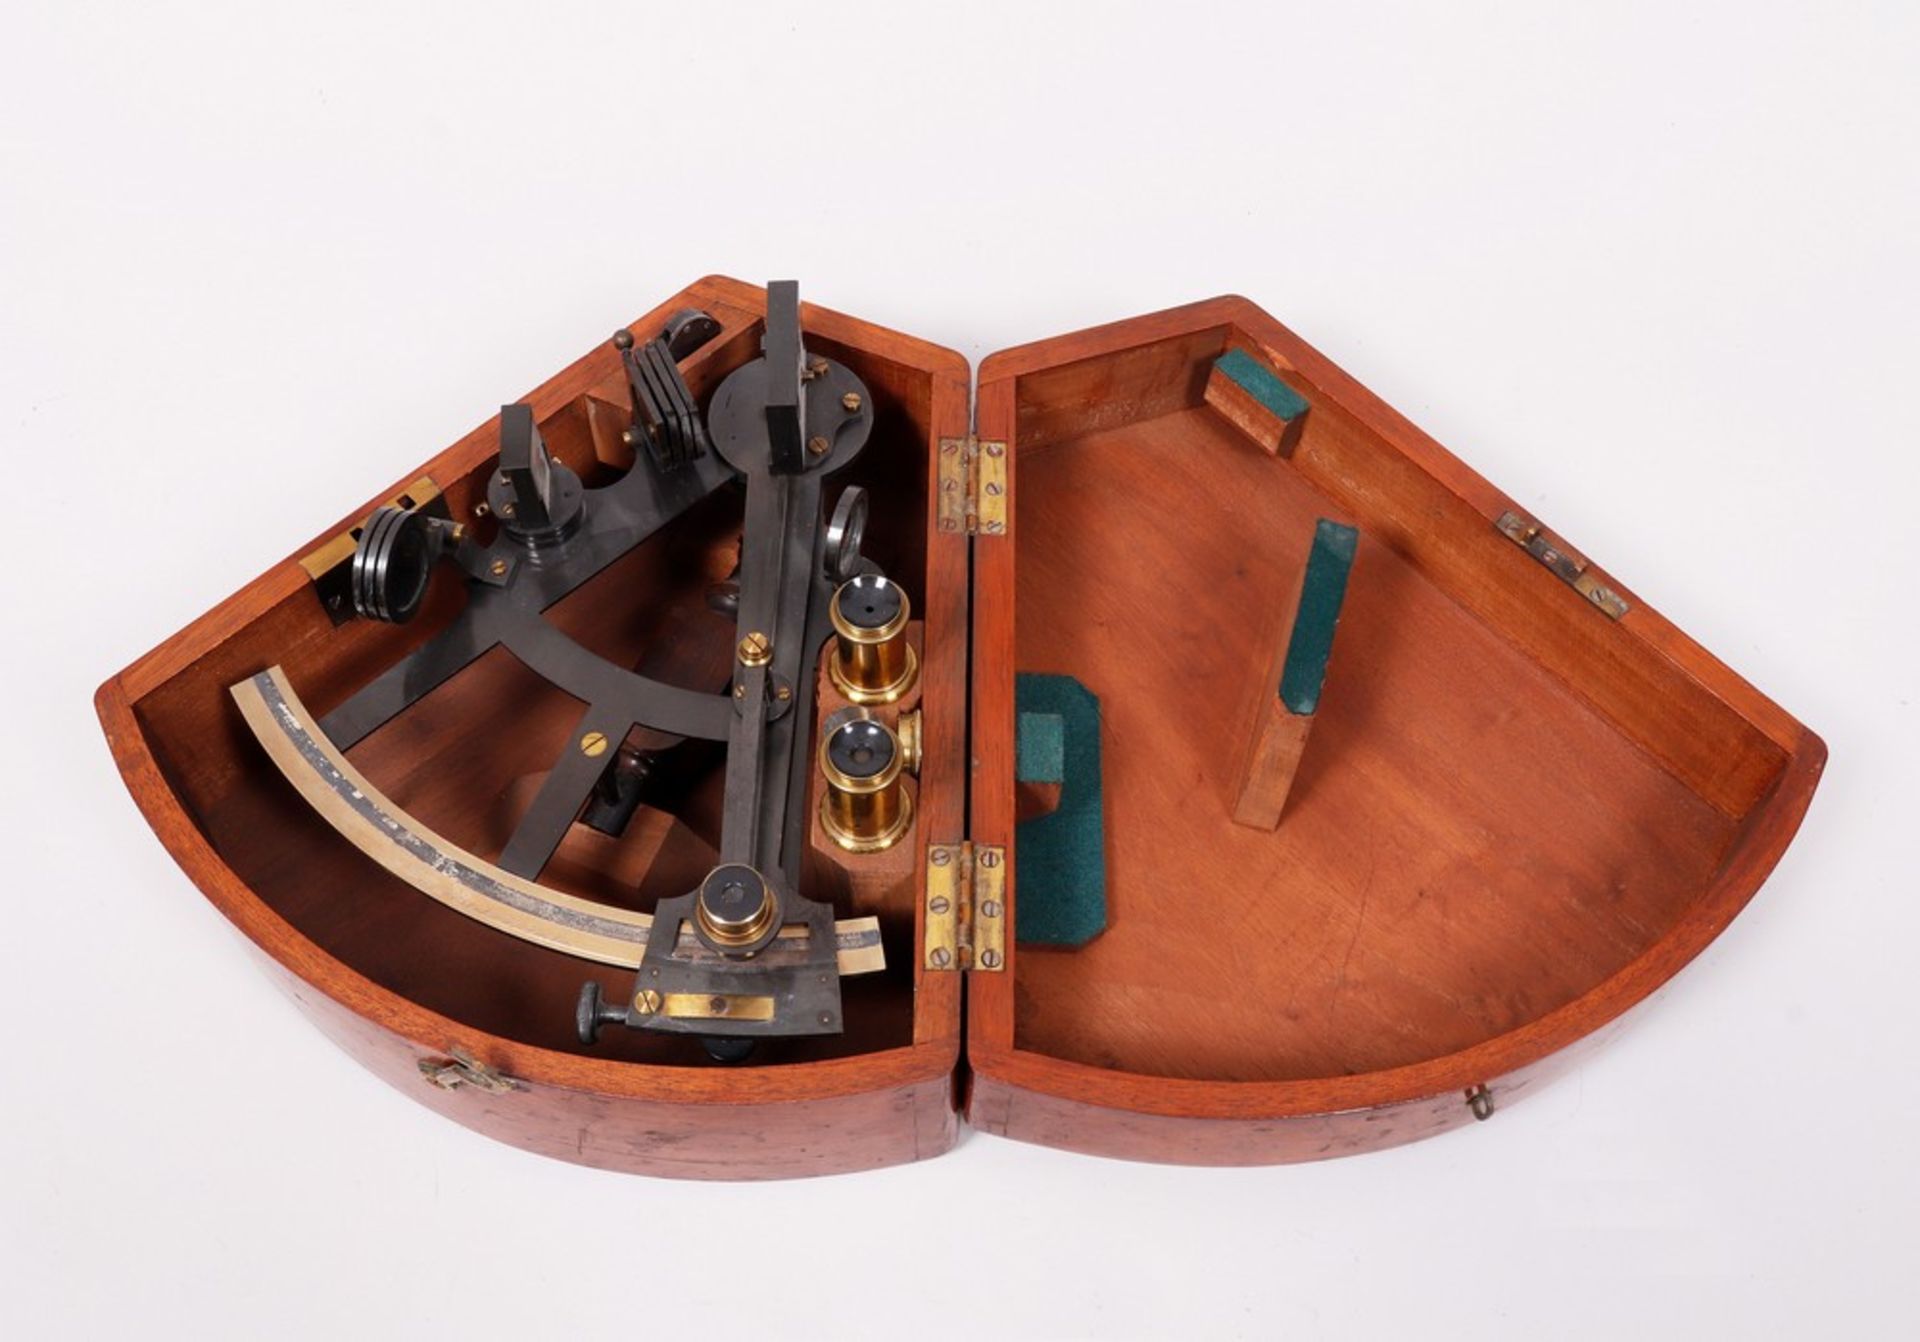 Sextant in transport box, Hawes & Sons, London, 19th C. - Image 4 of 4